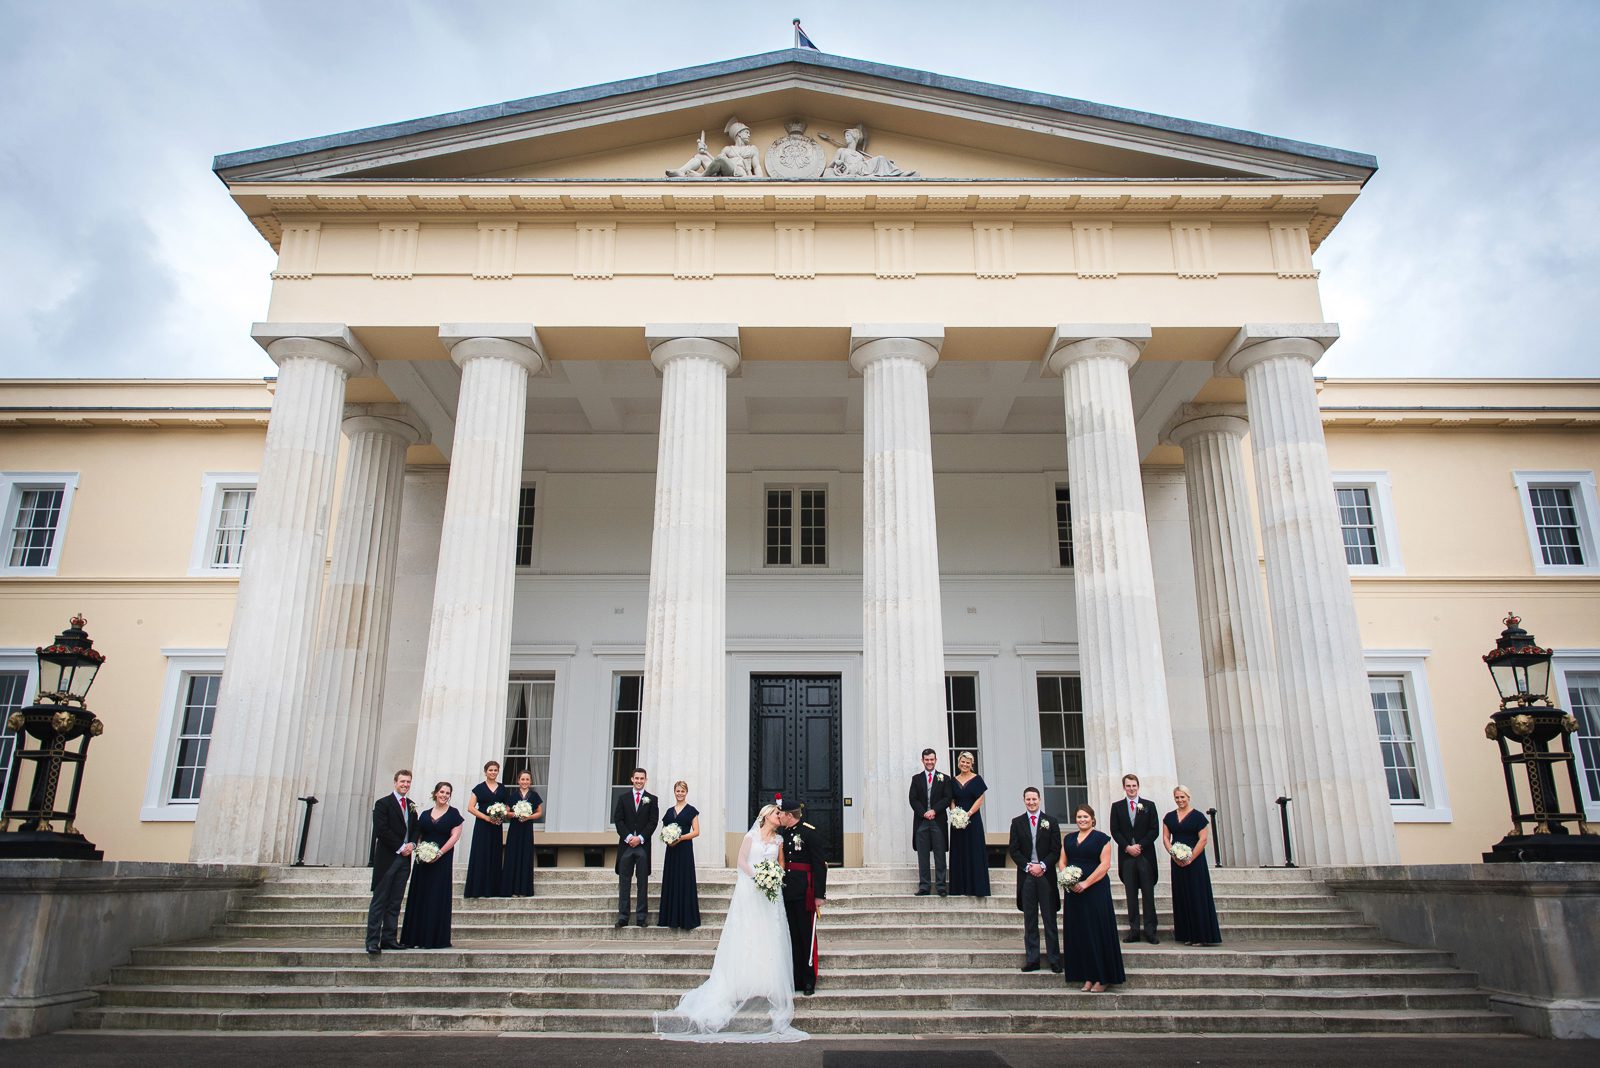 Stylish and alternative group shot of the wedding party for a military wedding at Sandhurst military Academy by local photographer Juliet Mckee.